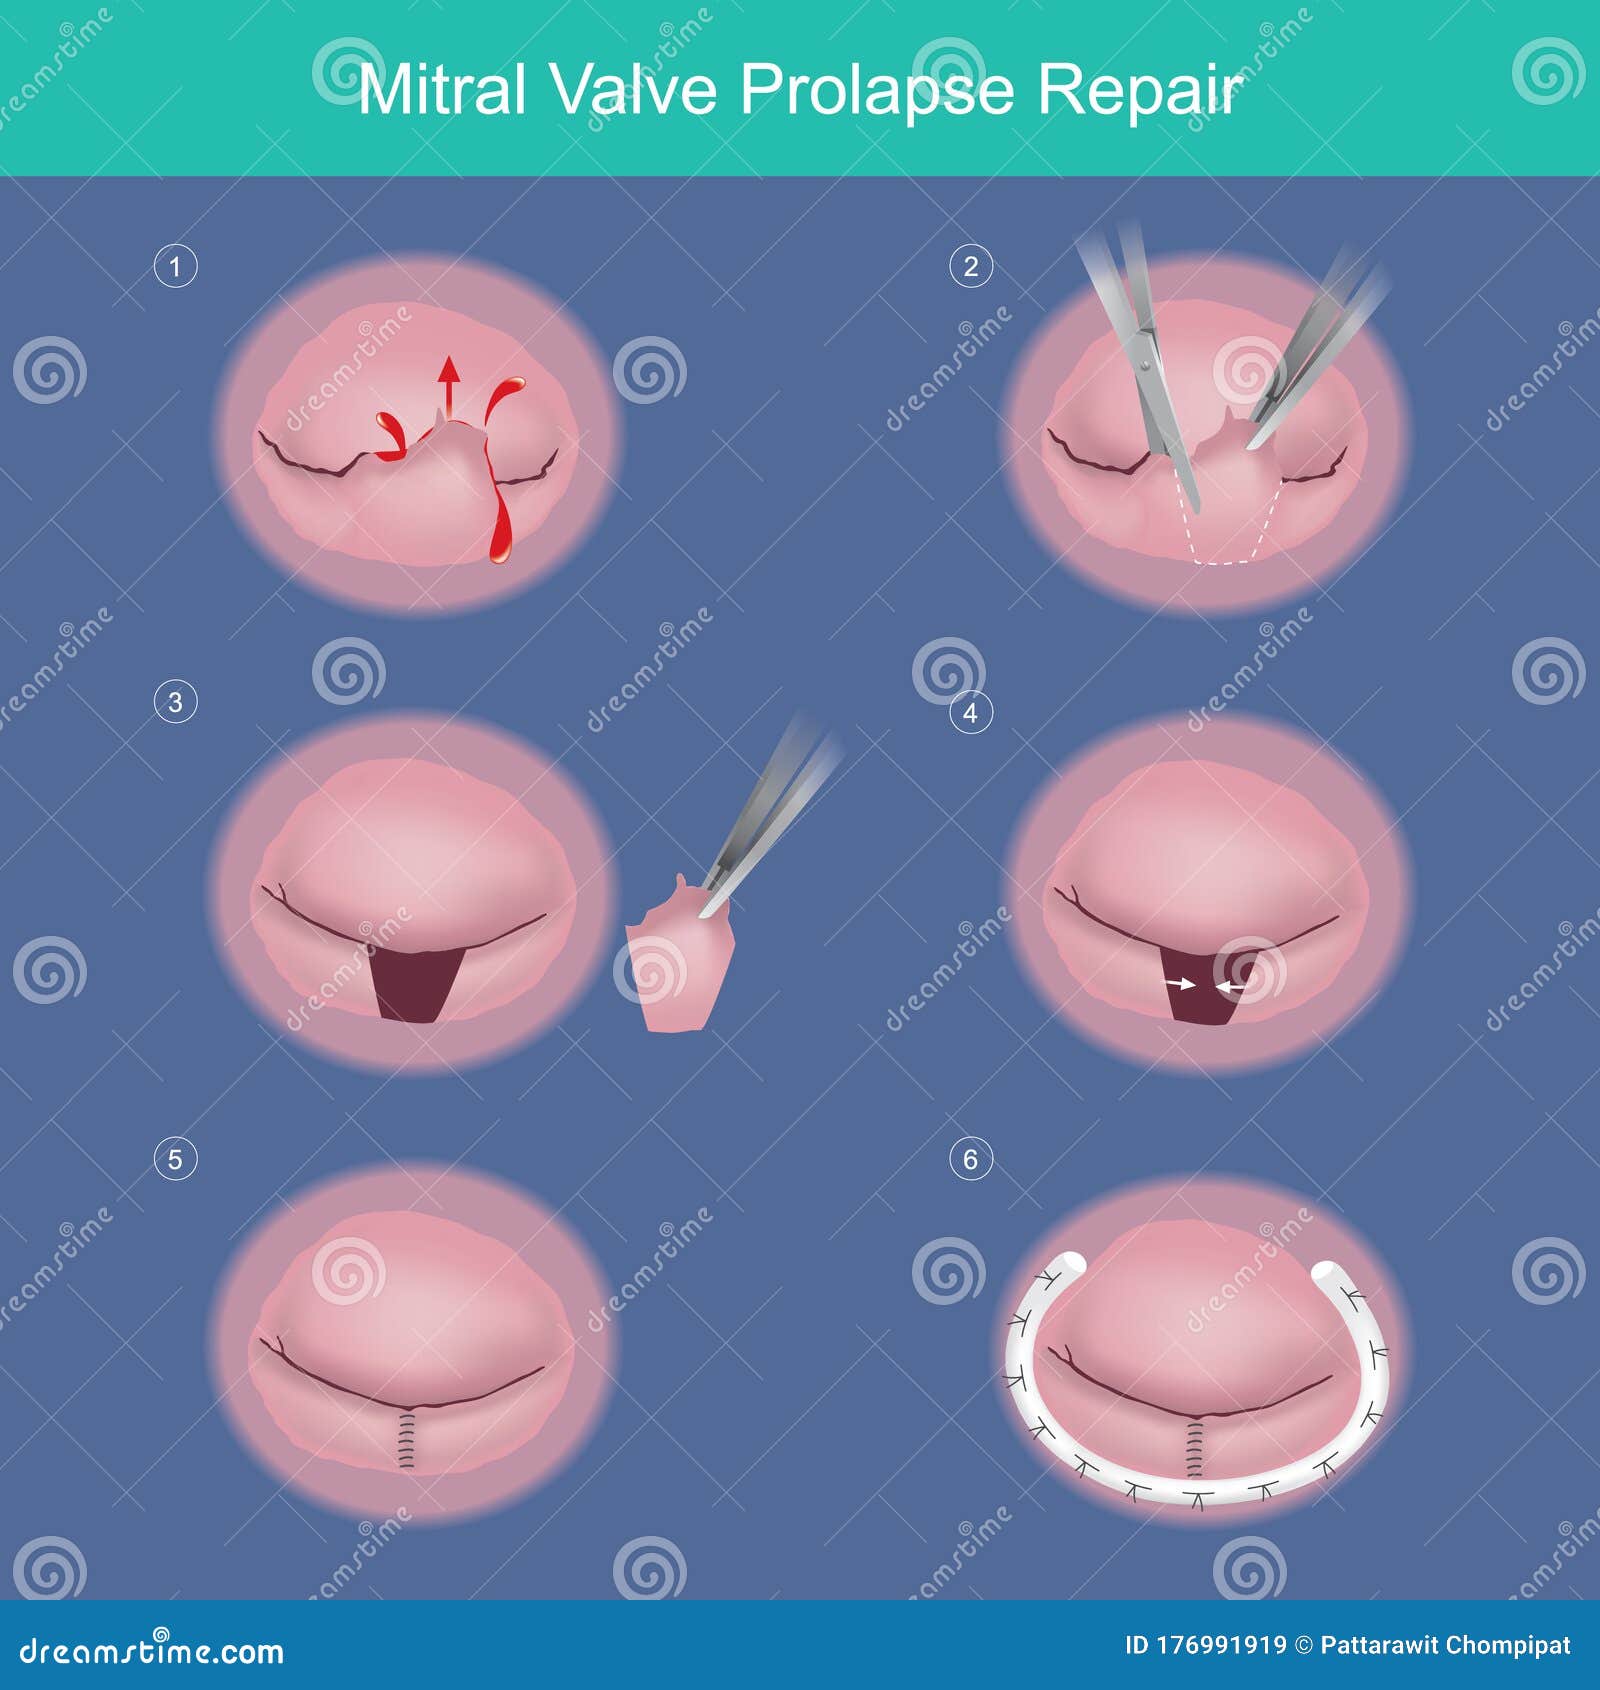 mitral valve prolapse repair. the method repair heart valve by surgery removed damaged or abnormal leaked segment and used